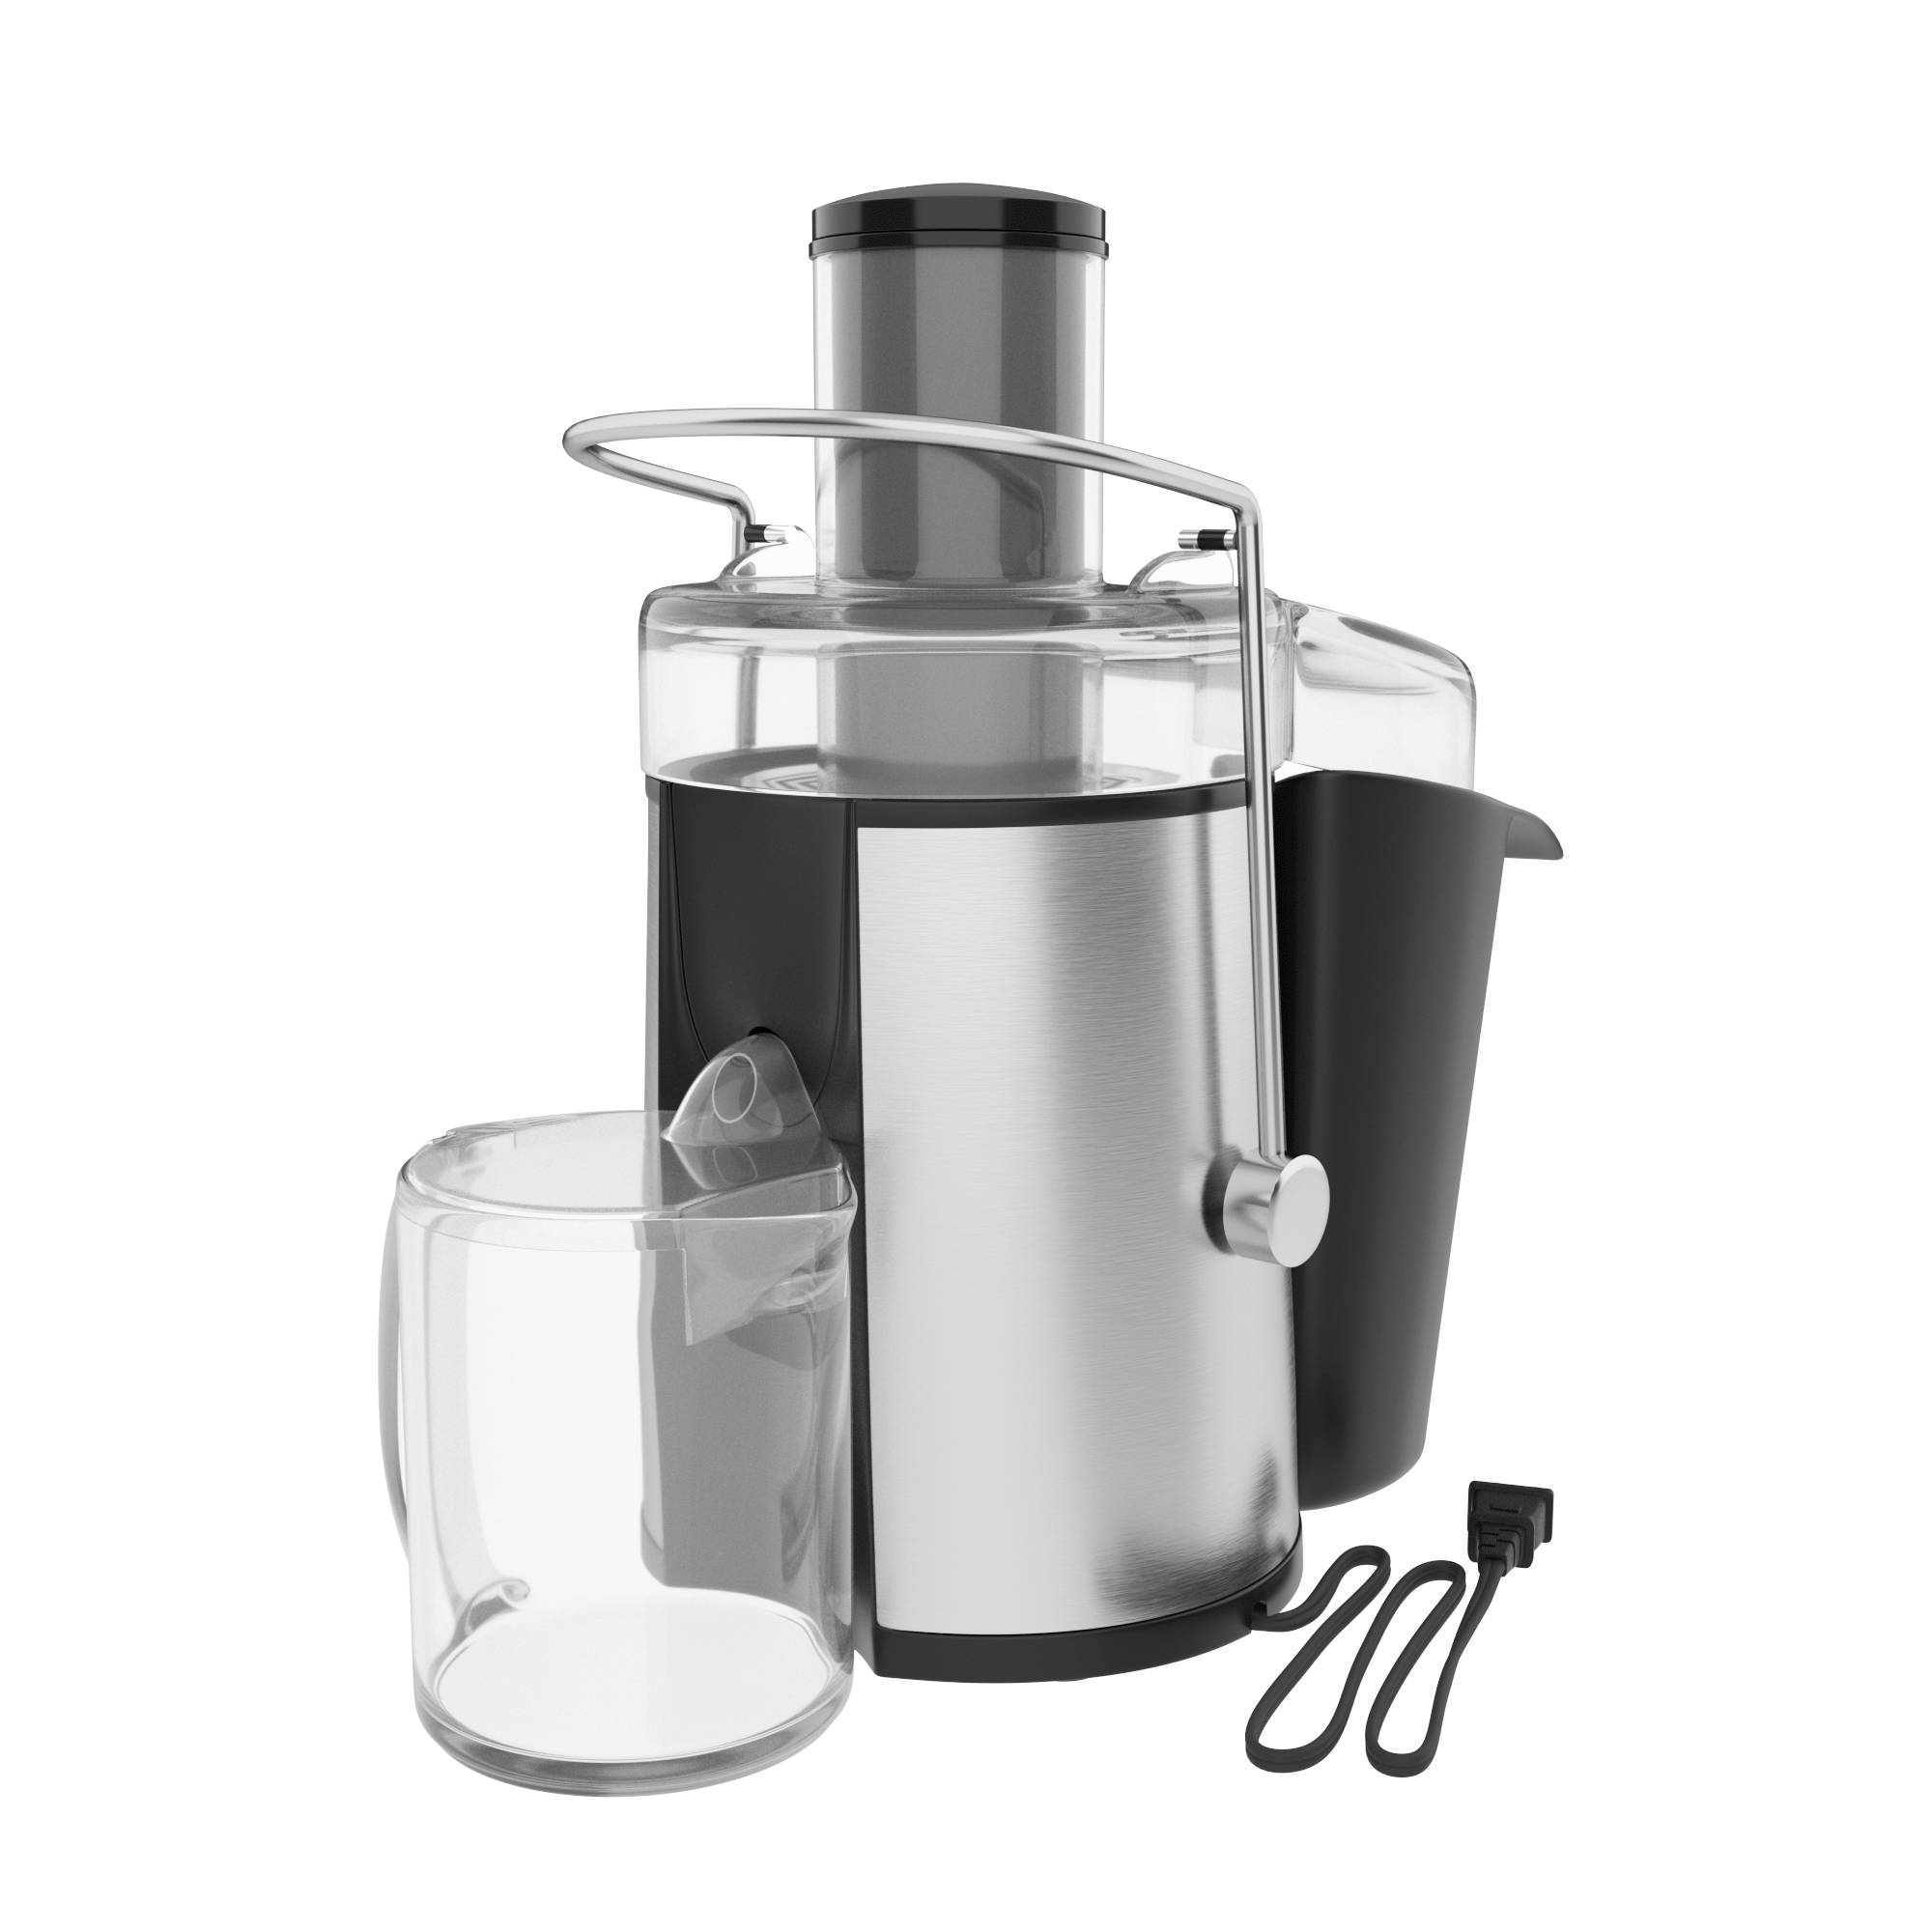 Mueller Austria Juicer Ultra MU-100 Extractor Press Pre-Owned Base Only